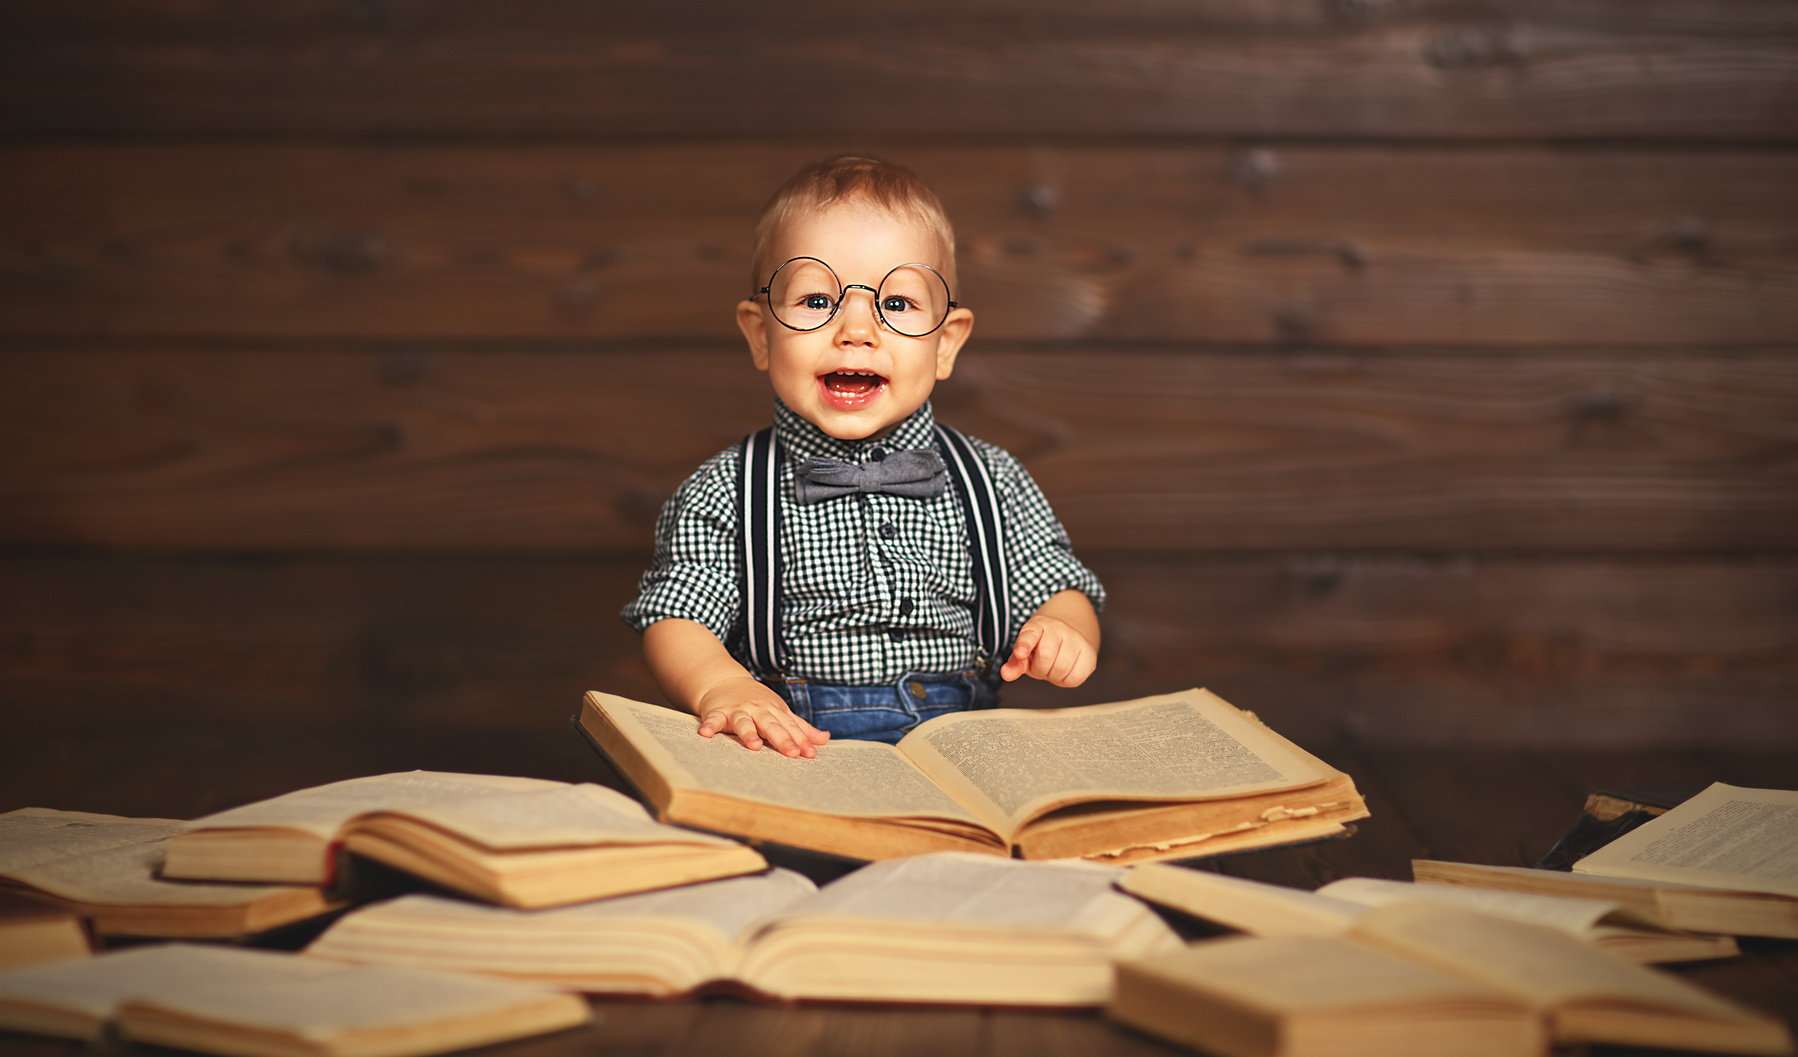 funny baby with books in glasses on a wooden background